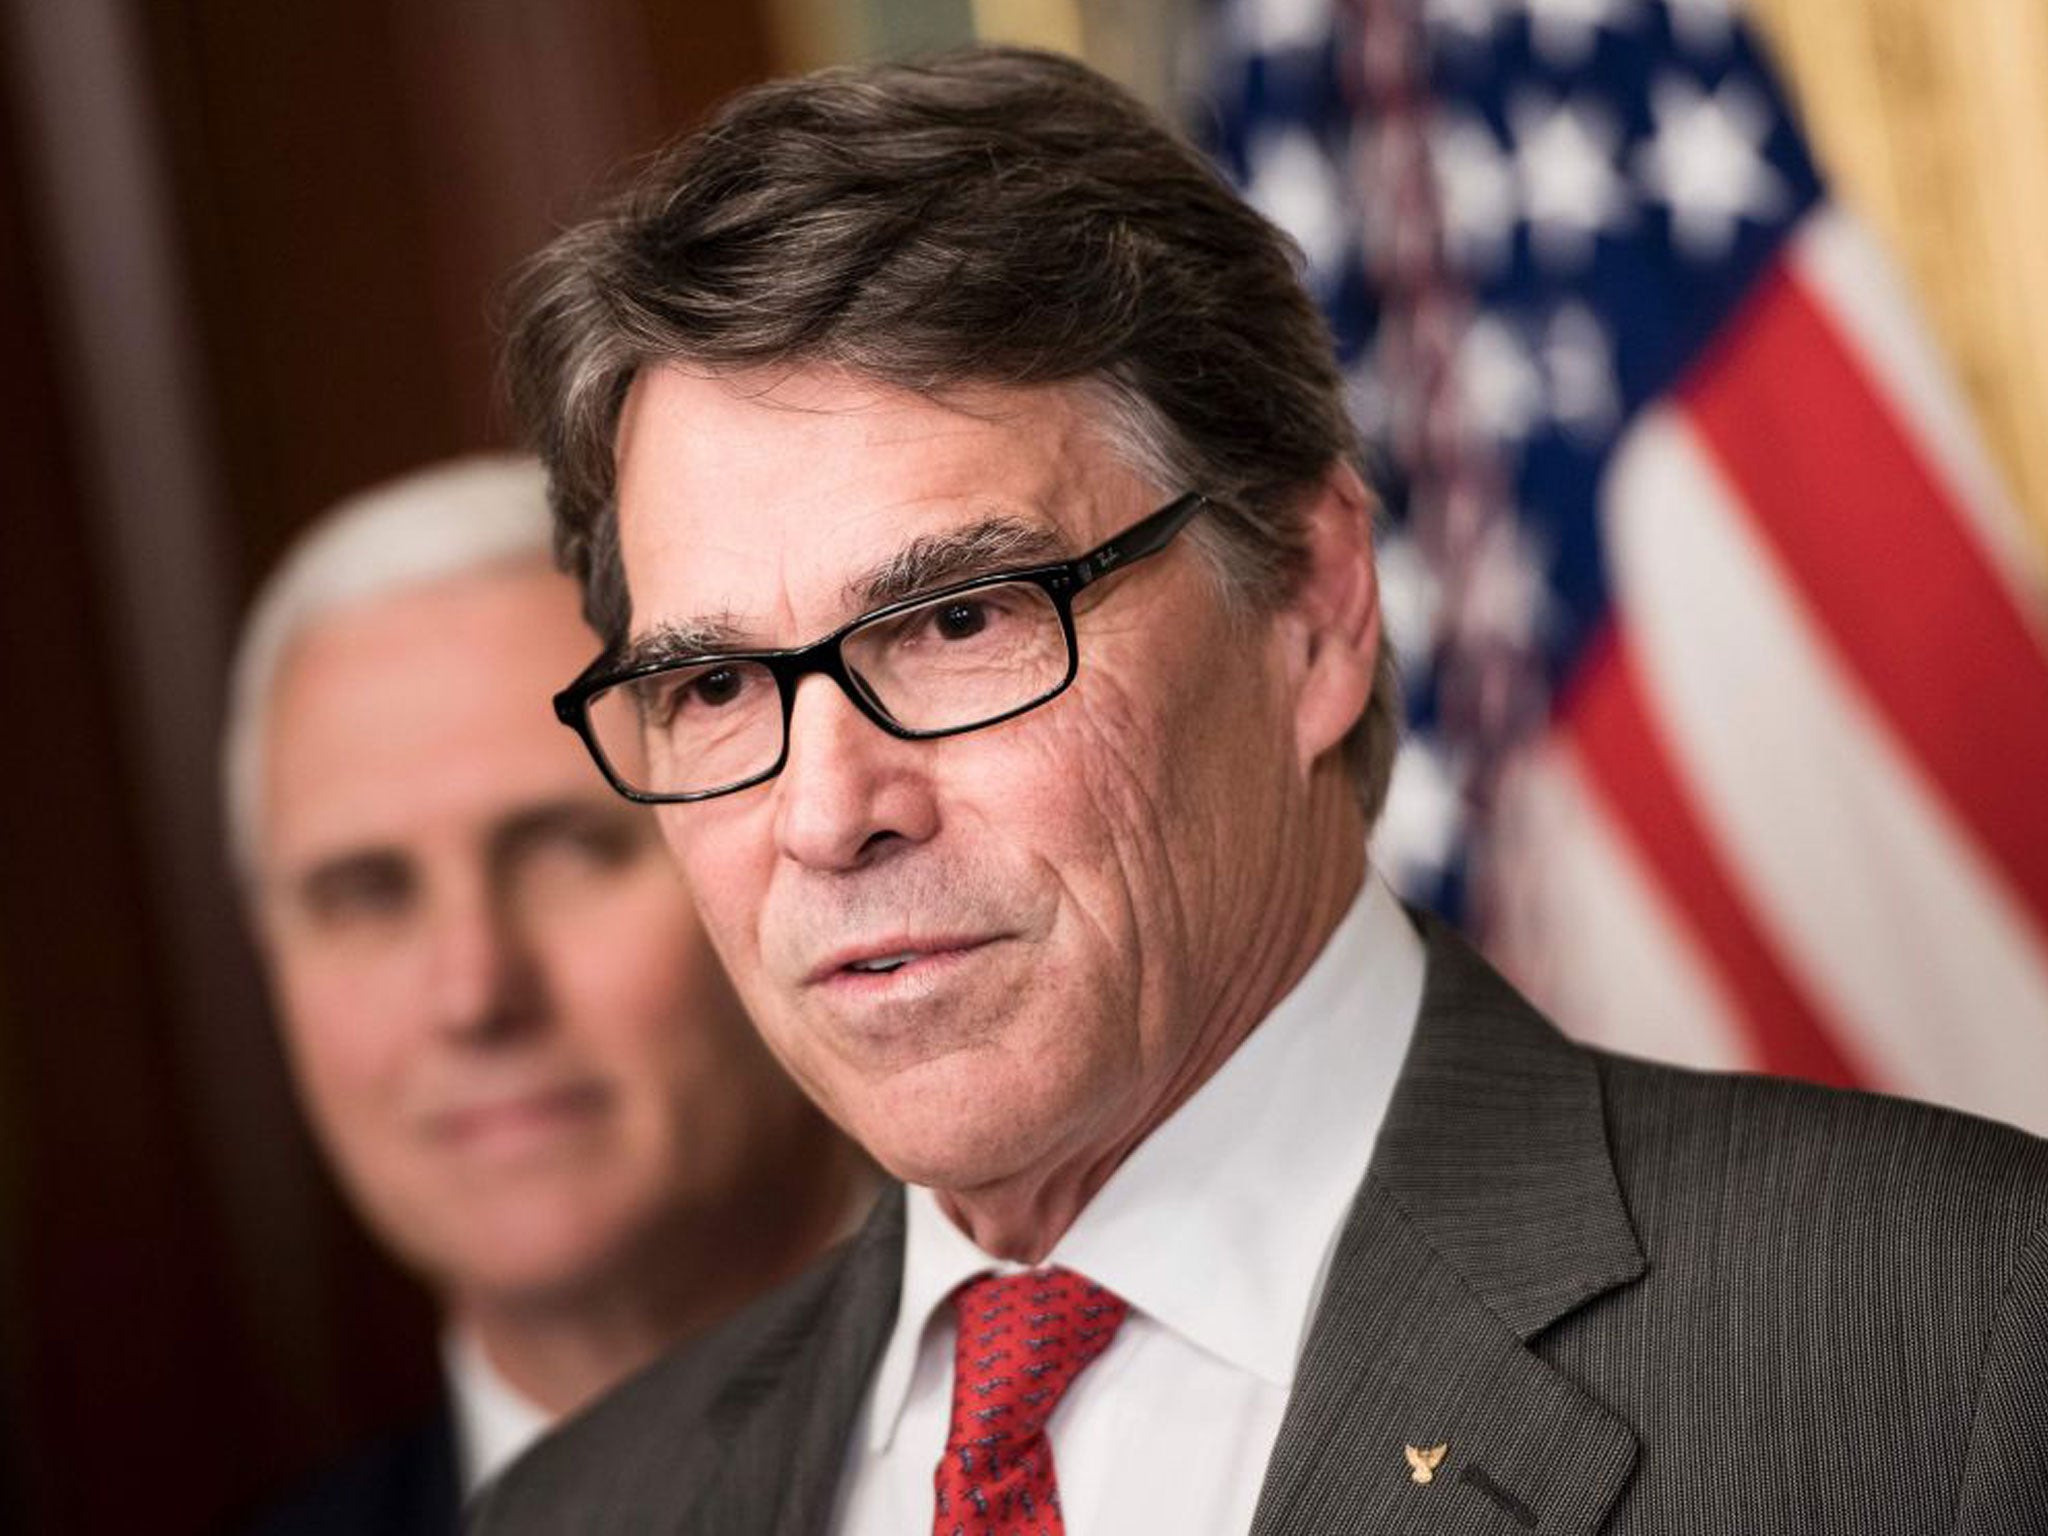 The United States should stay in the Paris climate accord but renegotiate it, Mr Perry said